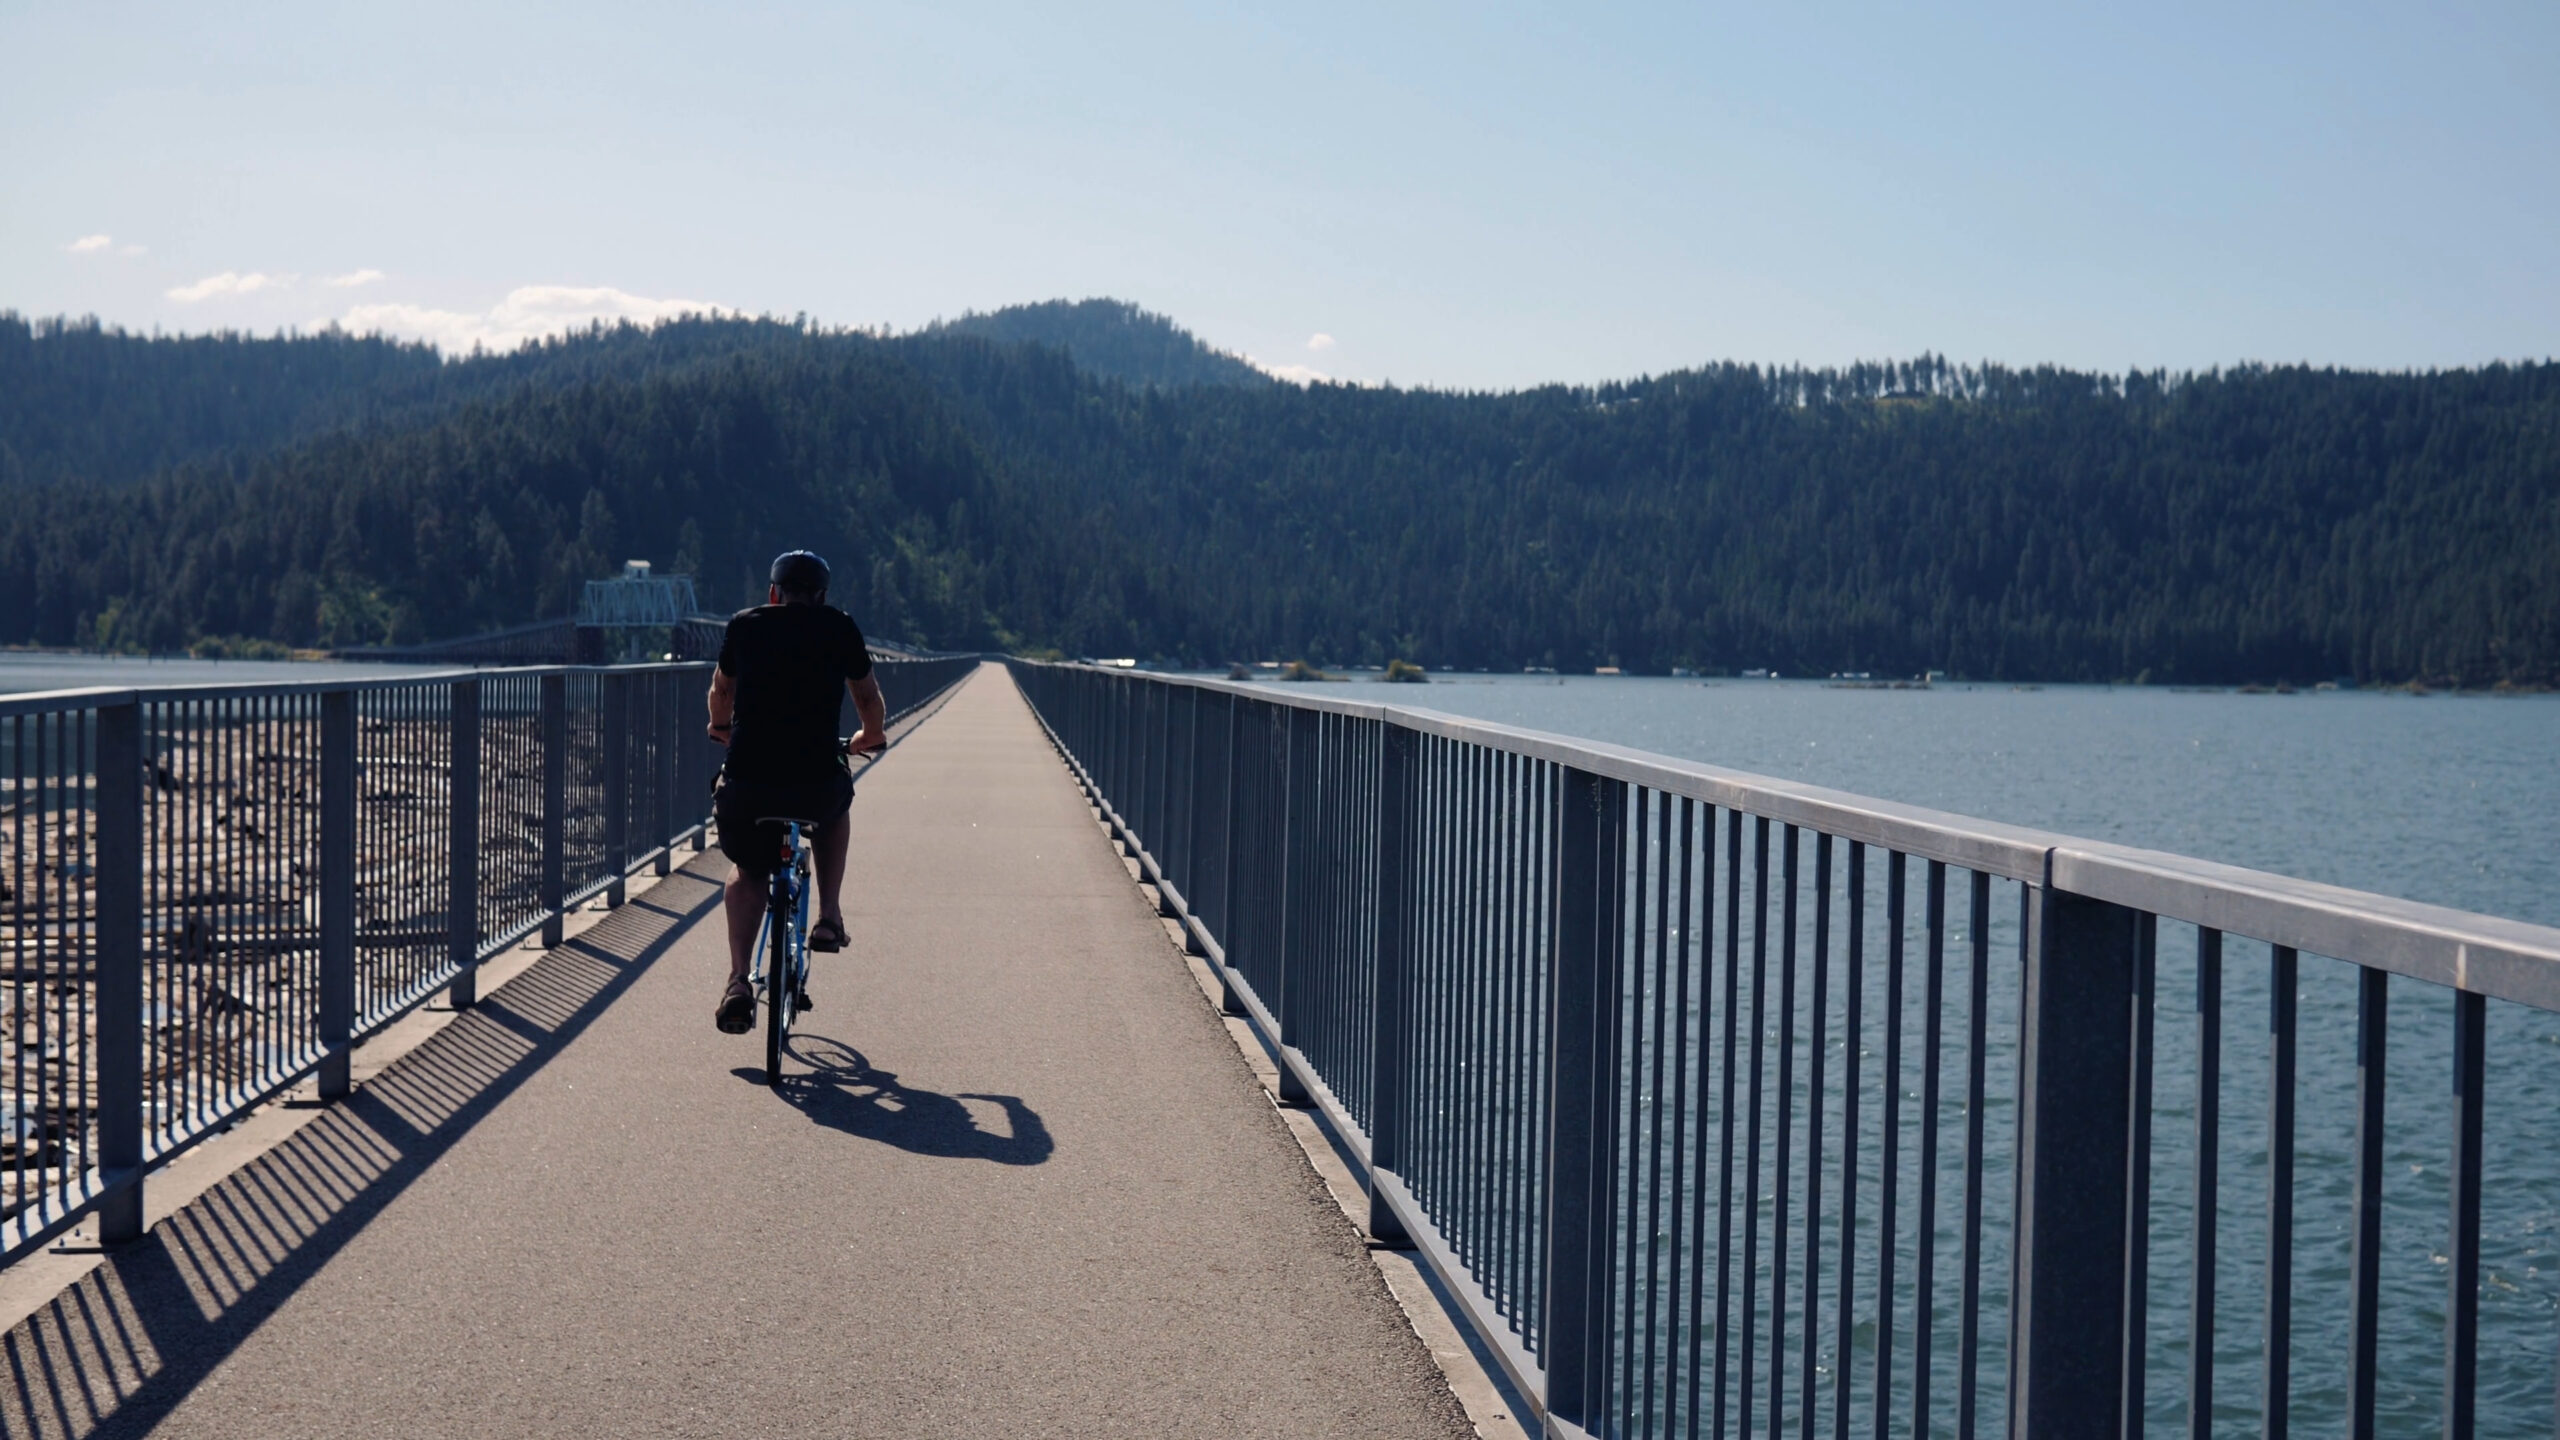 The Chatcolet Bridge on the Trail of the Coeur D Alenes